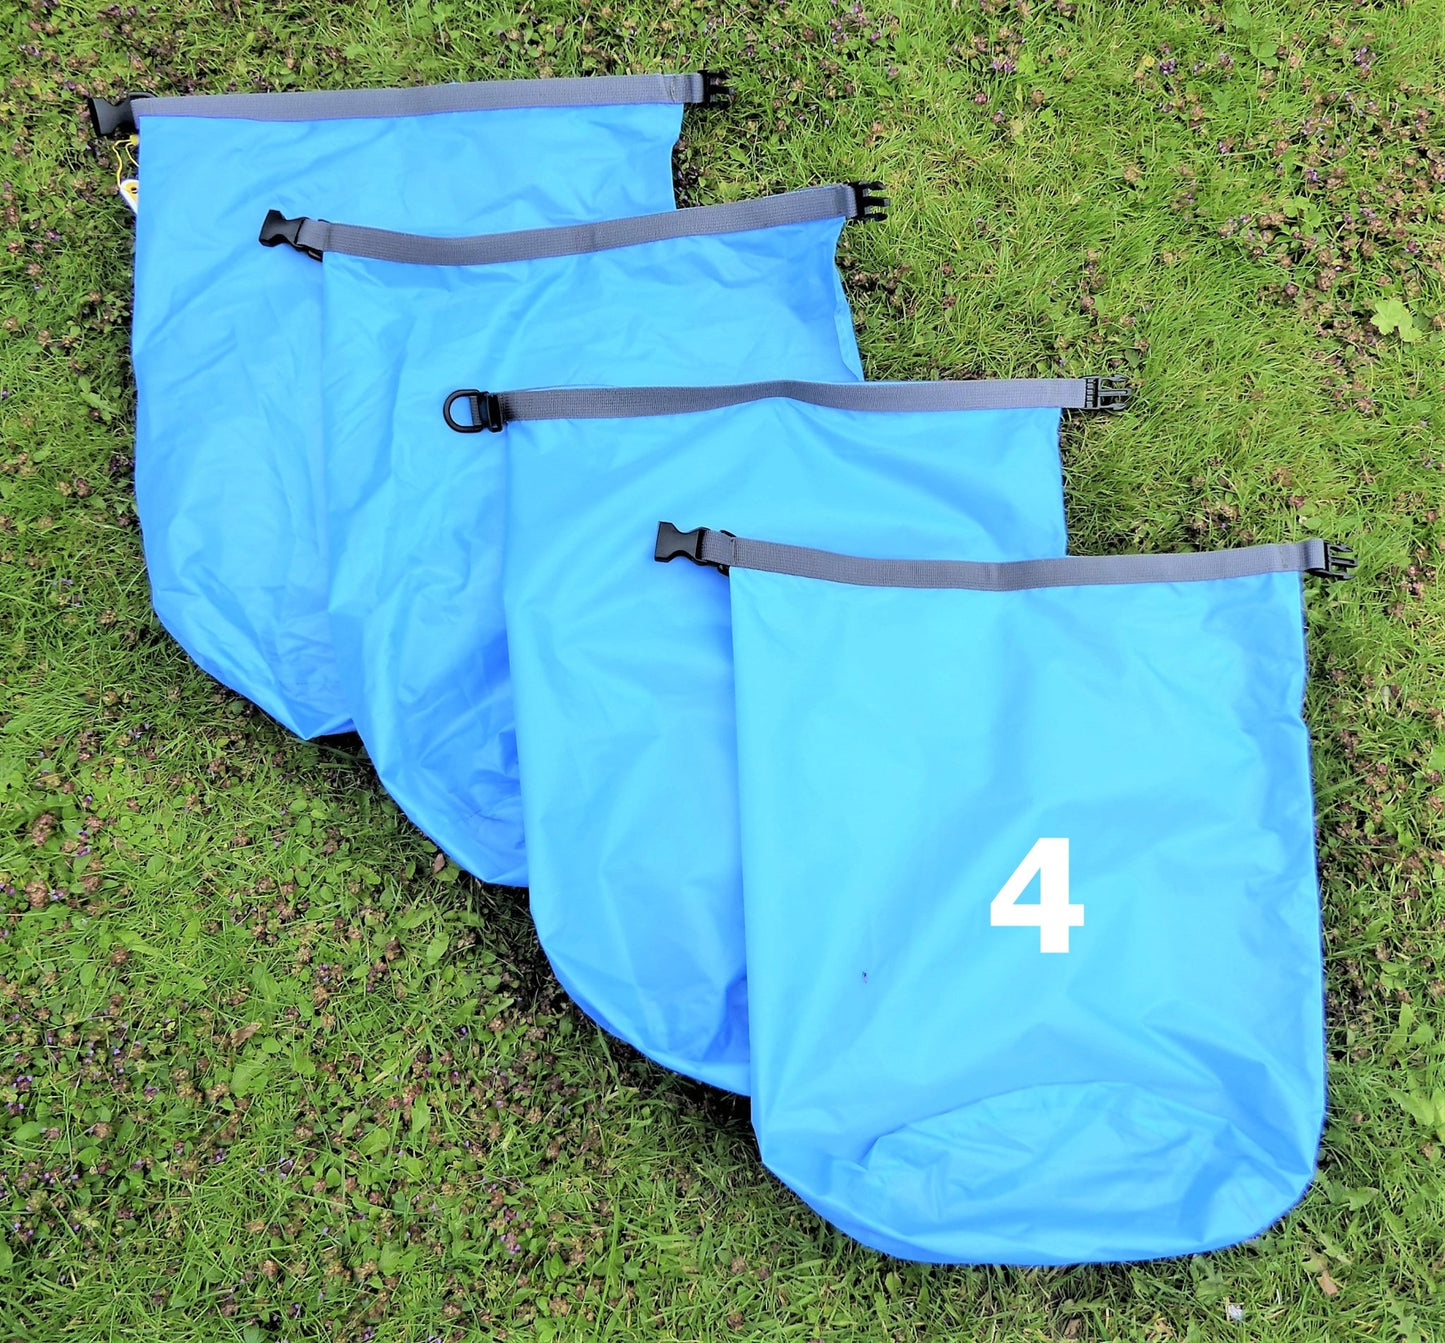 20L Dry Bags a useful and versatile piece of equipment for outdoor activities such as hiking, camping, kayaking, canoeing  Huggins Attic 4   [Huggins attic]